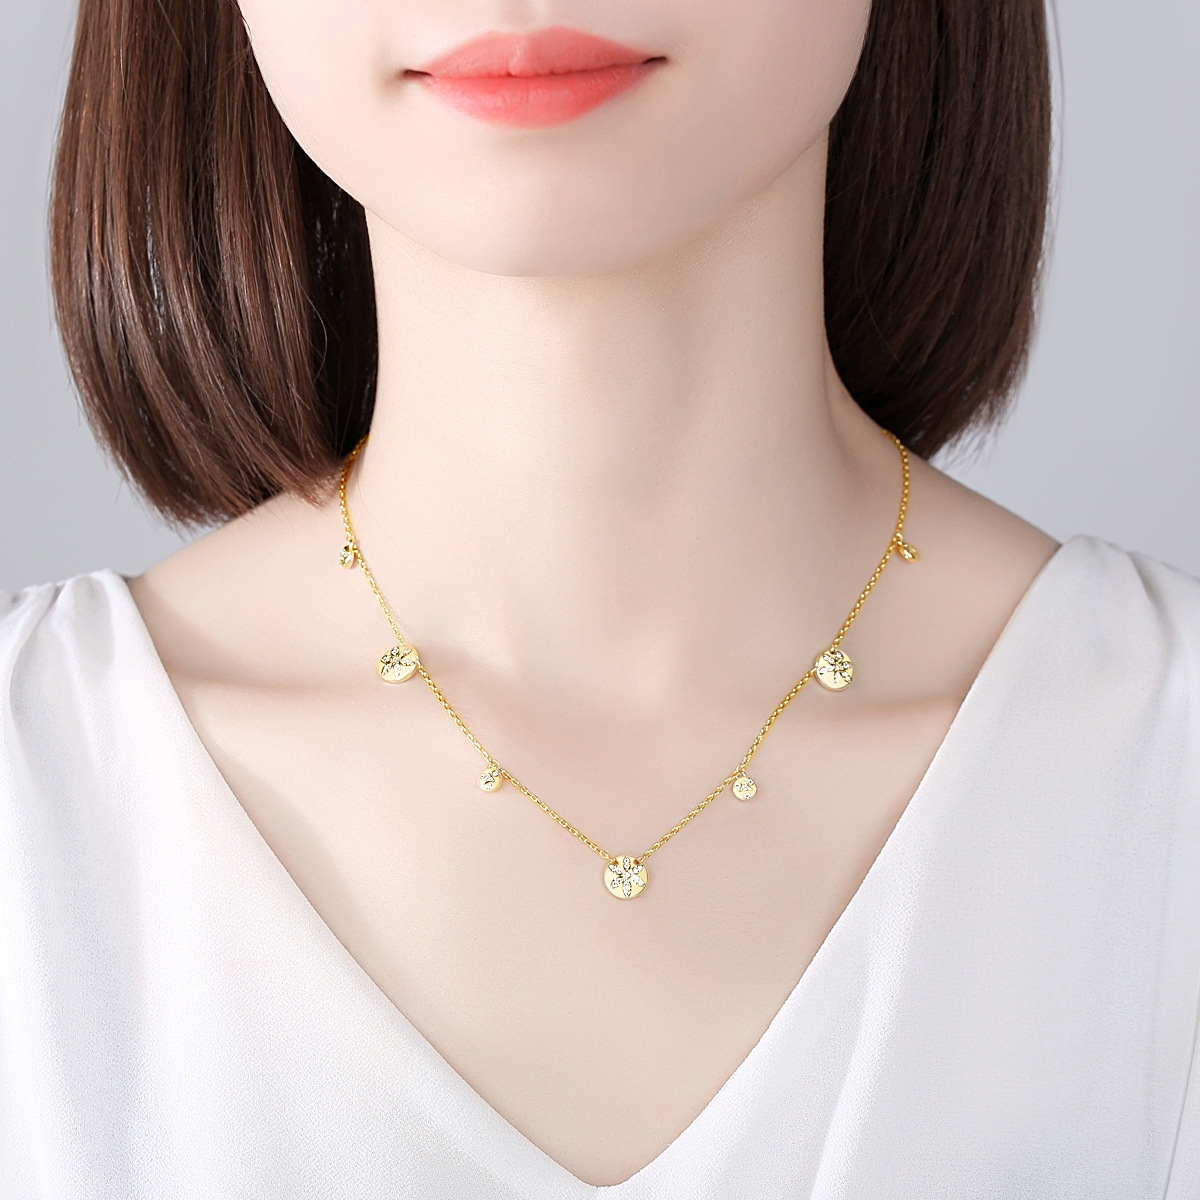 Minority personality clavicle necklace simple necklace for women